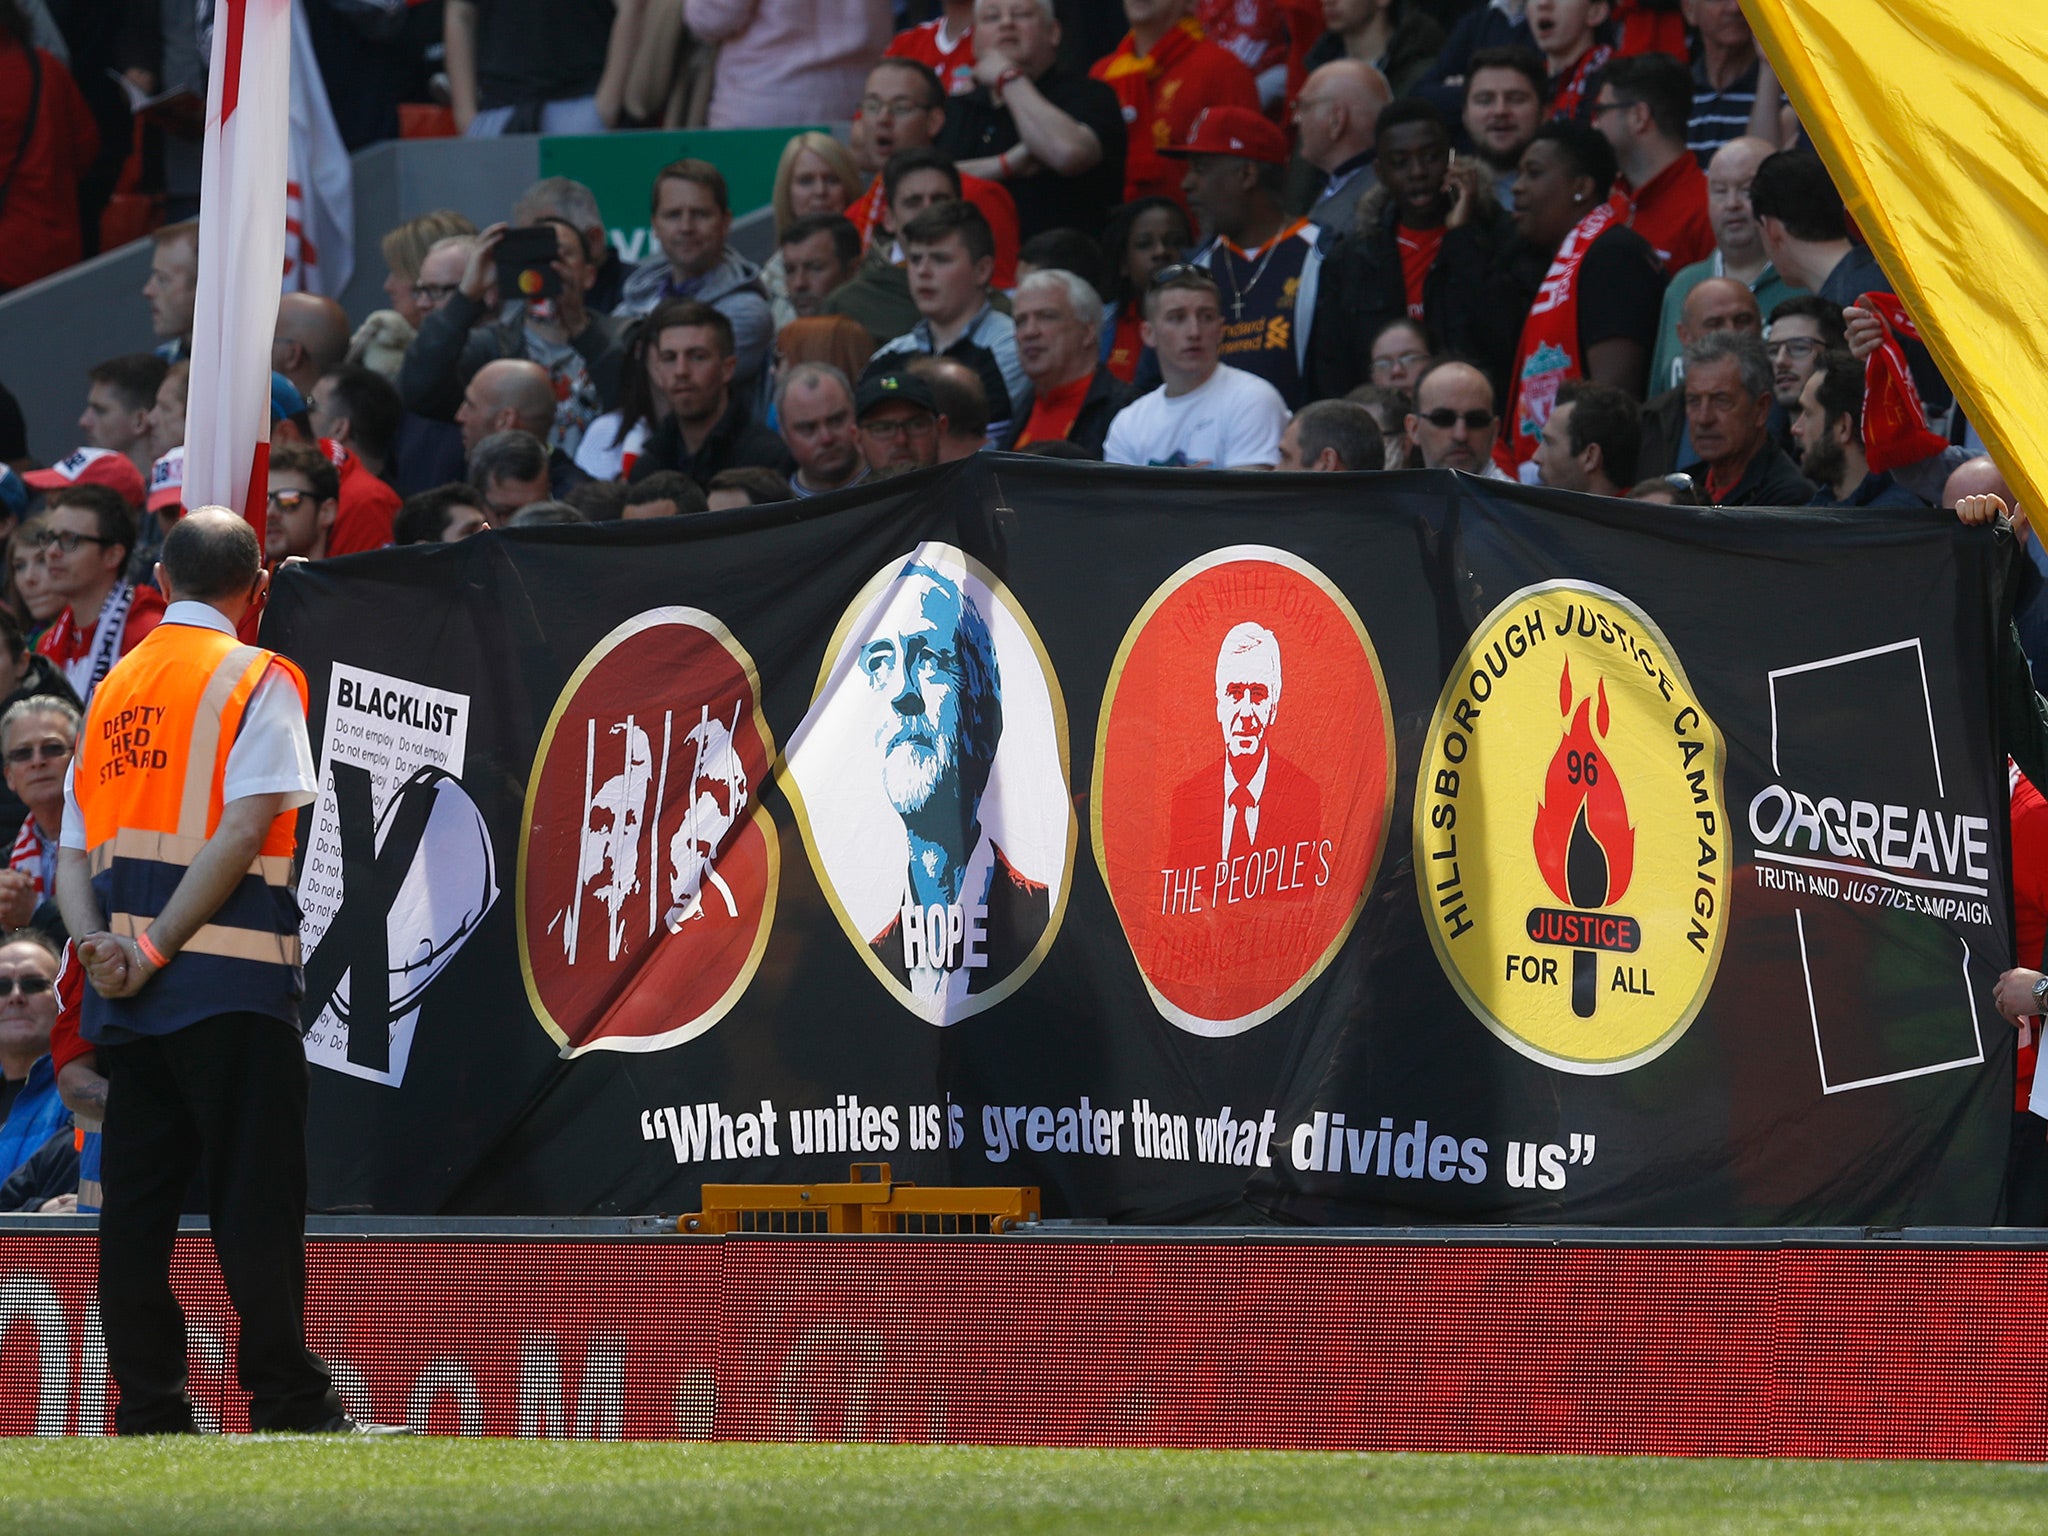 The banner was designed as a show of support to Jeremy Corbyn's Labour